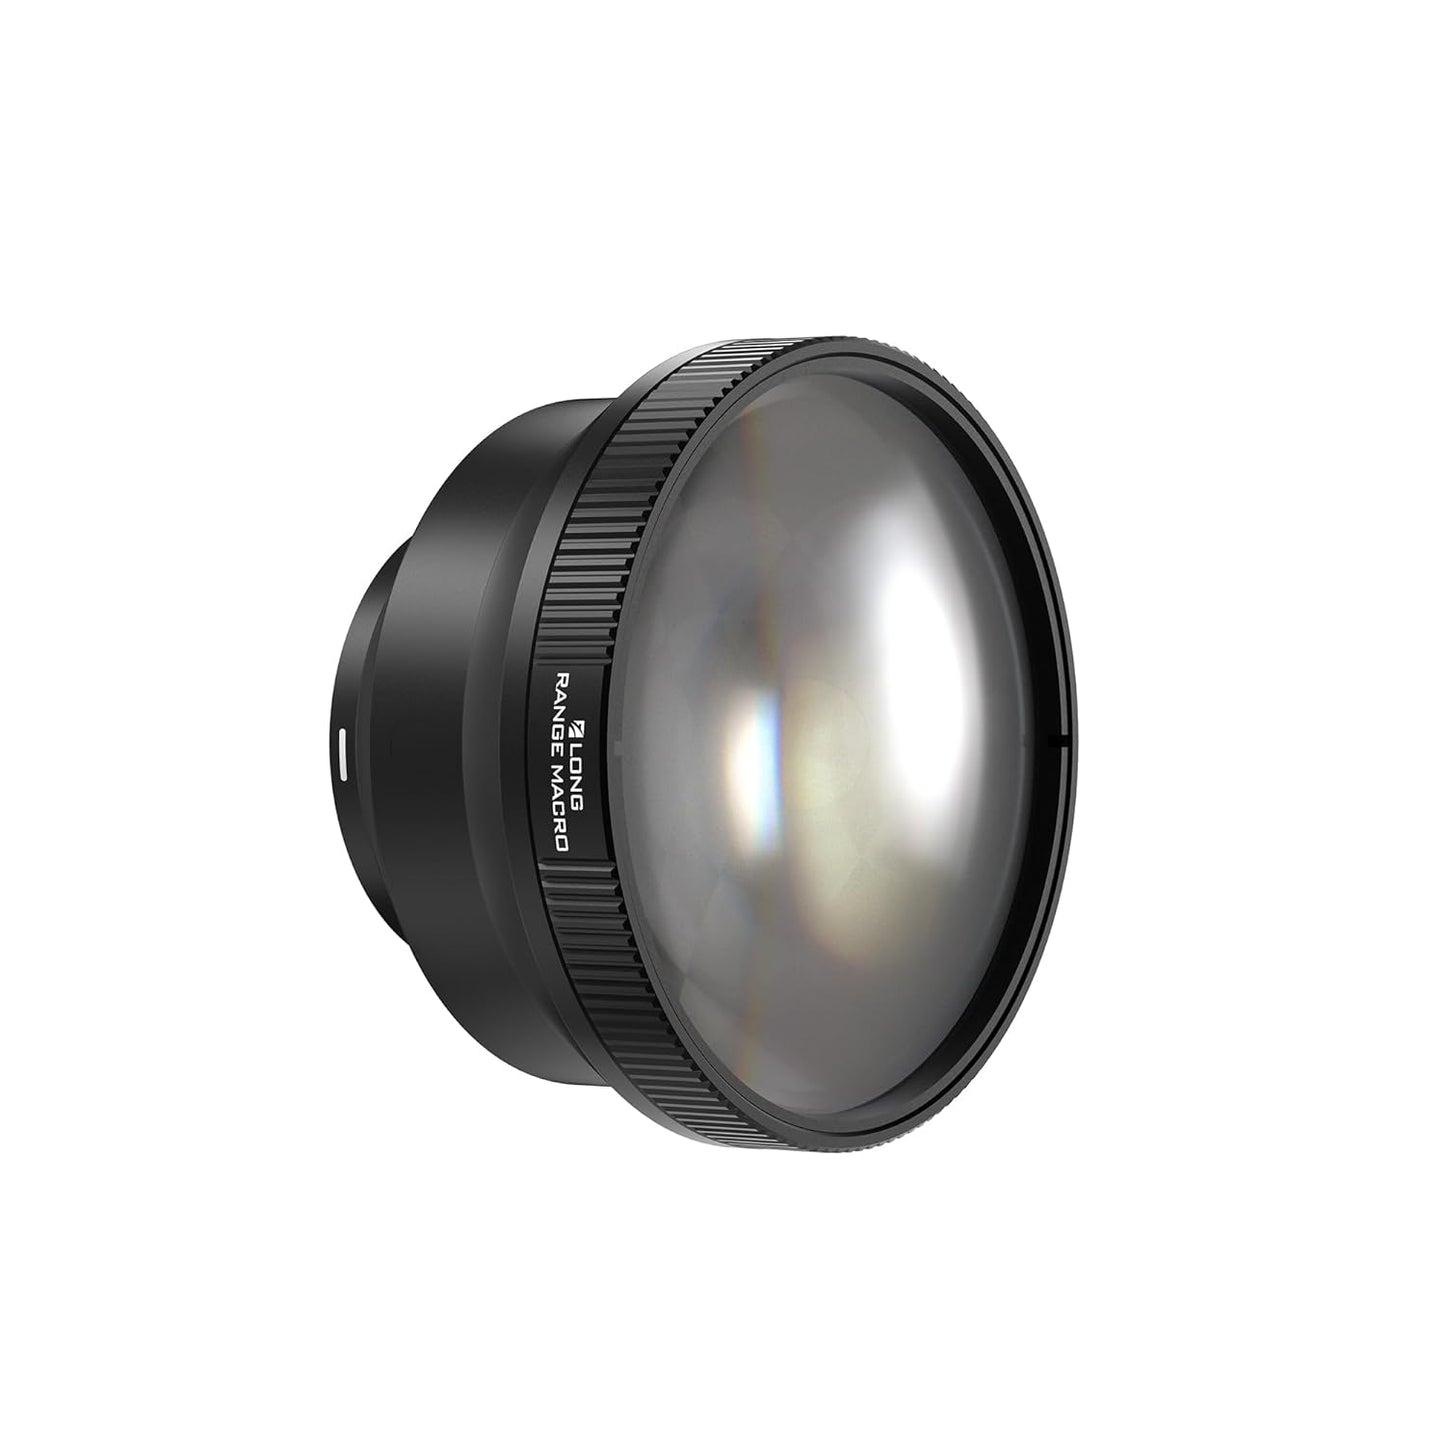 Long Range Macro Lens Compatible with Freewell Sherpa & Galaxy Series